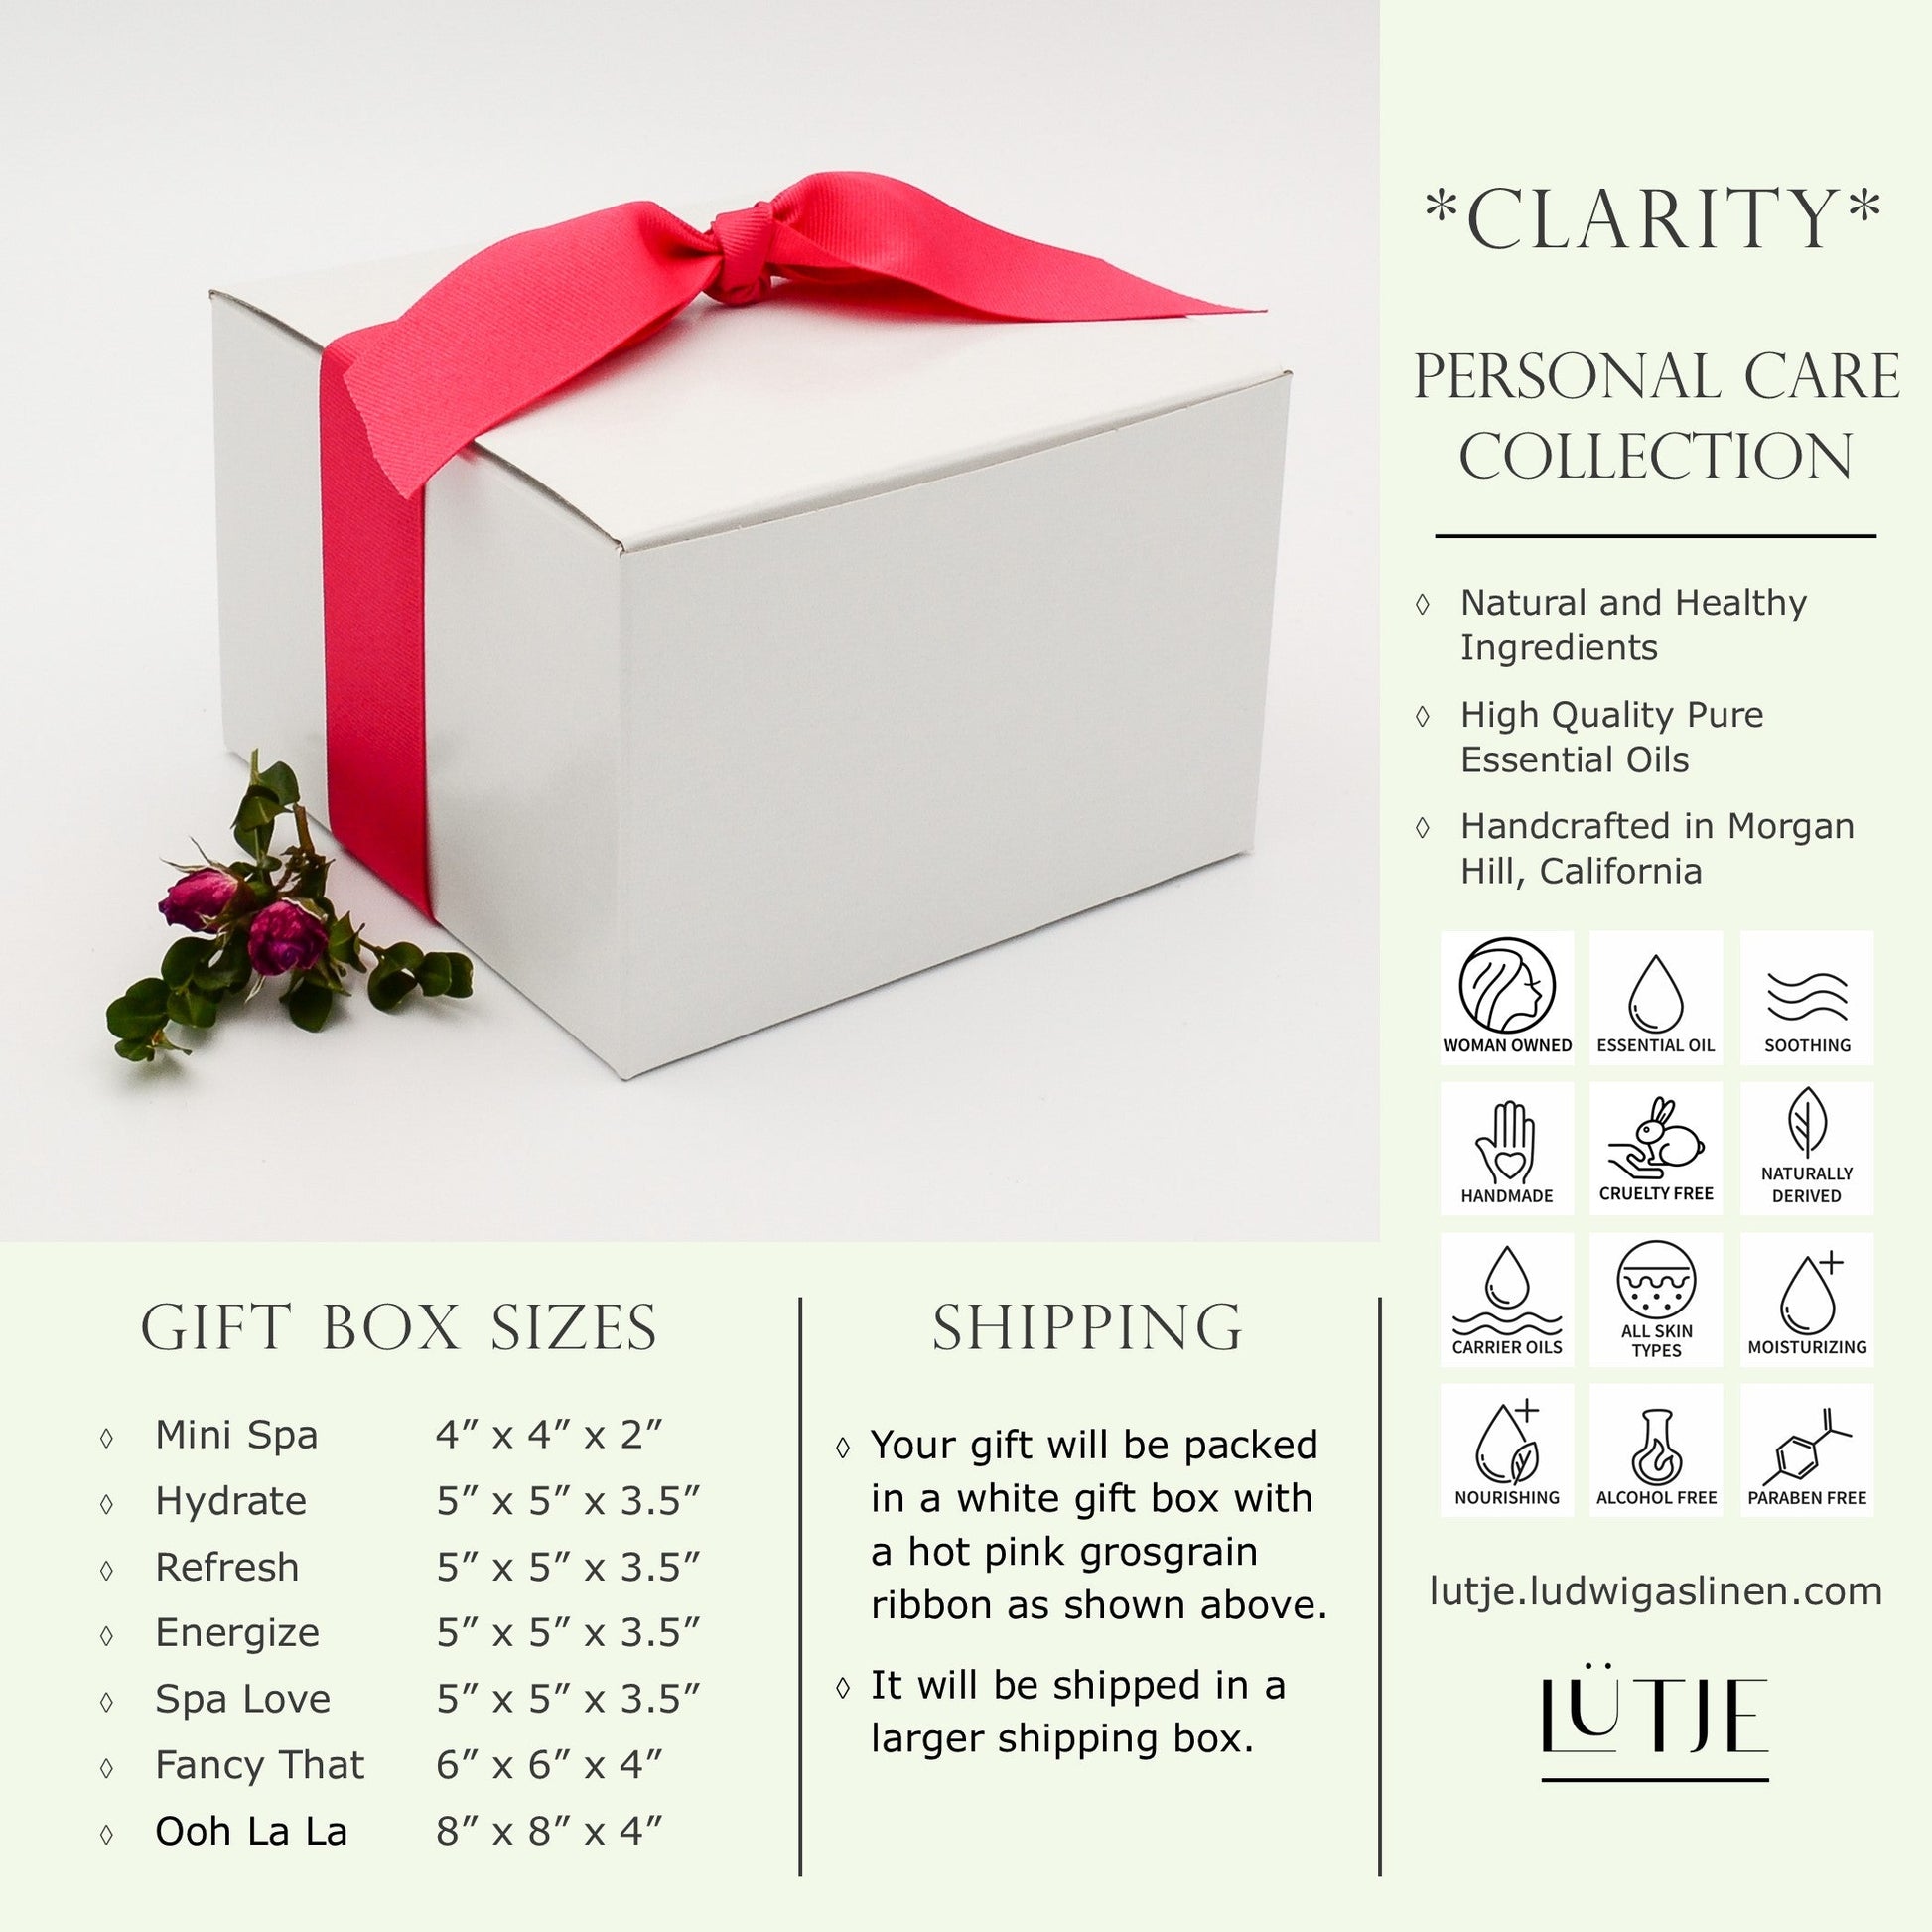 Gift Box for women Bergamot & Black Pepper Arise Collection shipping and general information including made with natural and healthy ingredients,woman owned, handmade, cruelty free, naturally derived, pure essential oils, all skin types, moisturizing, soothing, nourishing, alcohol free and paraben free. 